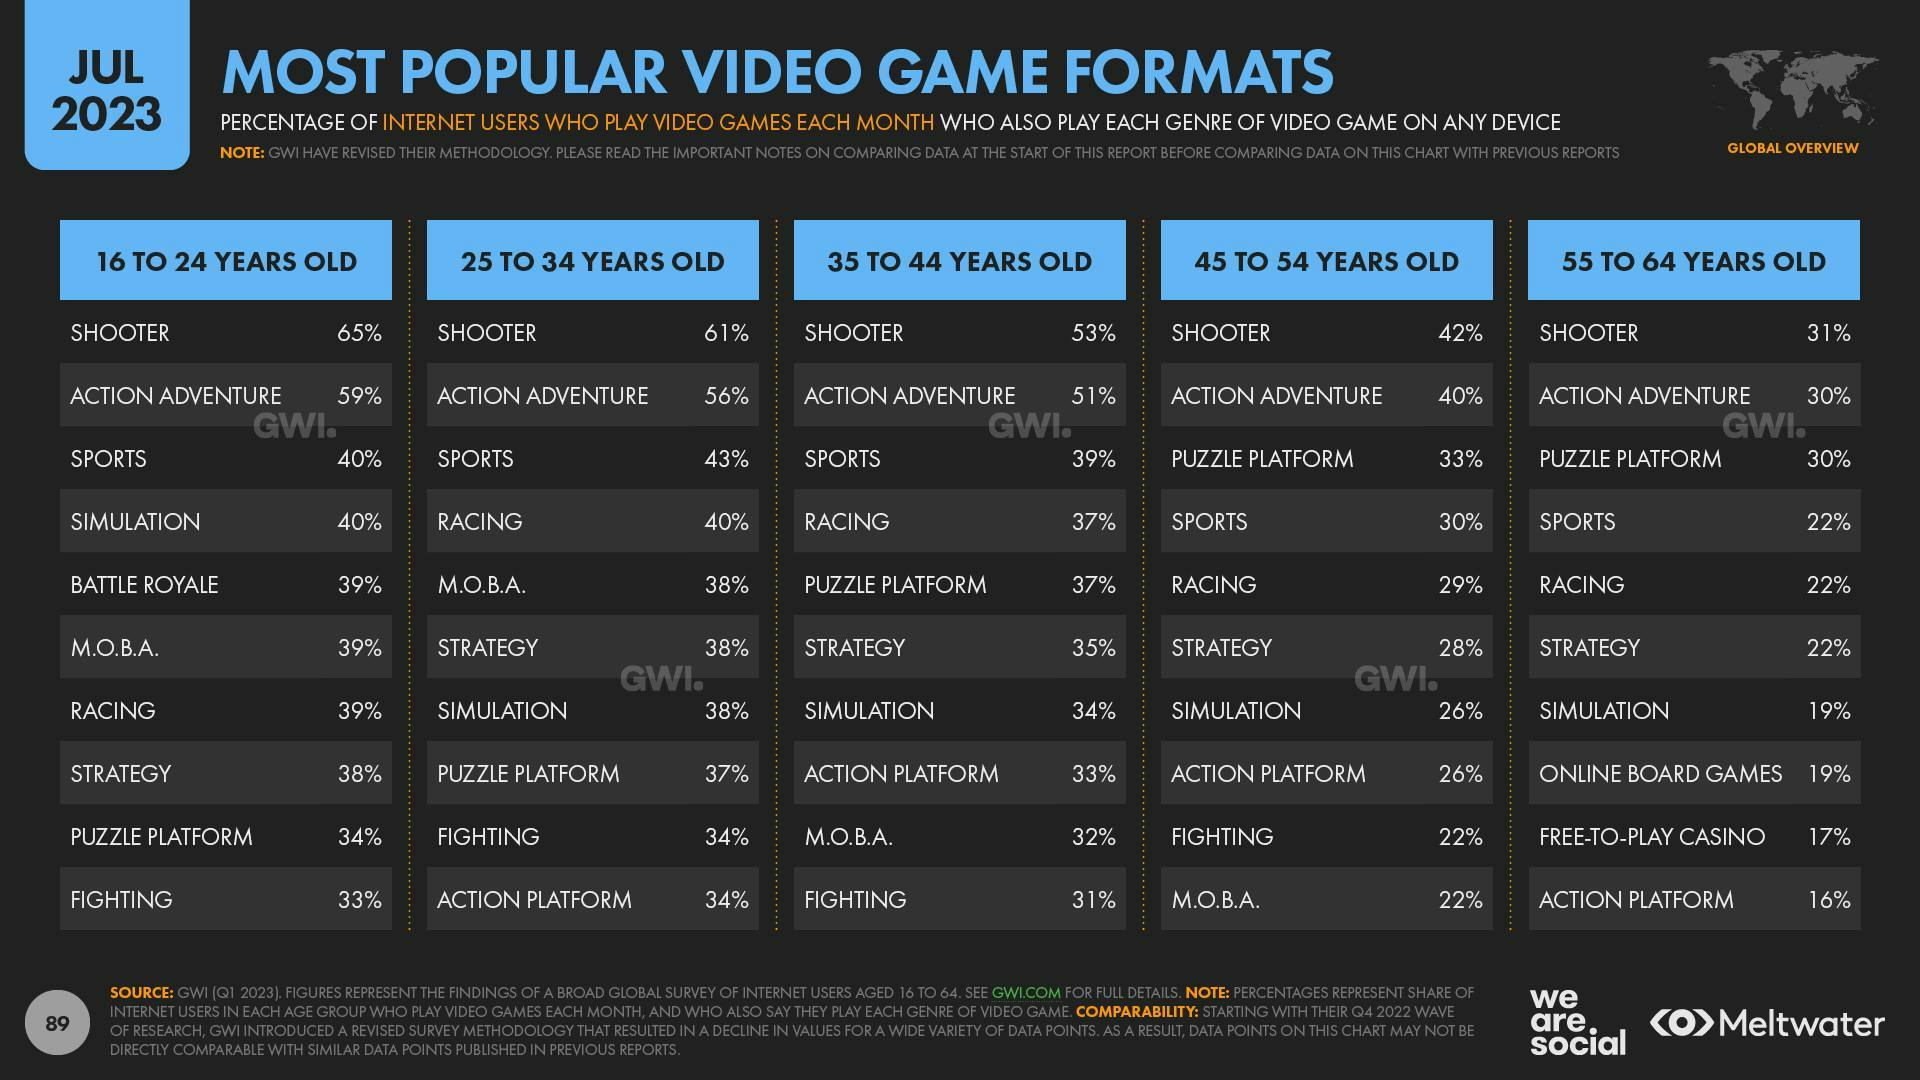 Most popular video game formats by age group